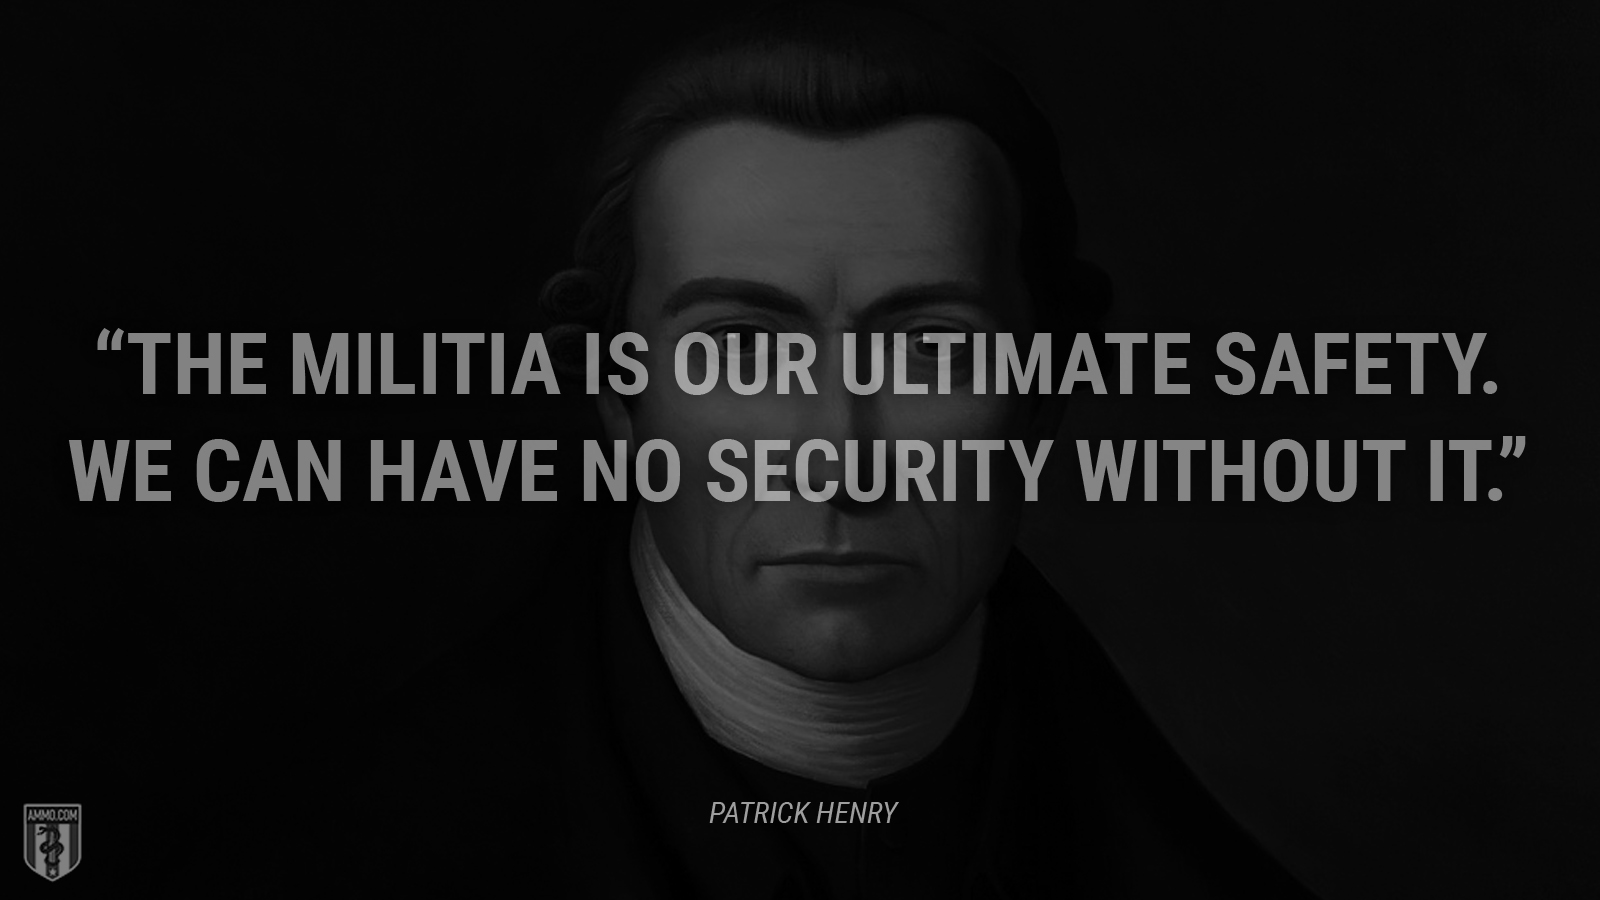 “The militia is our ultimate safety. We can have no security without it.” - Patrick Henry